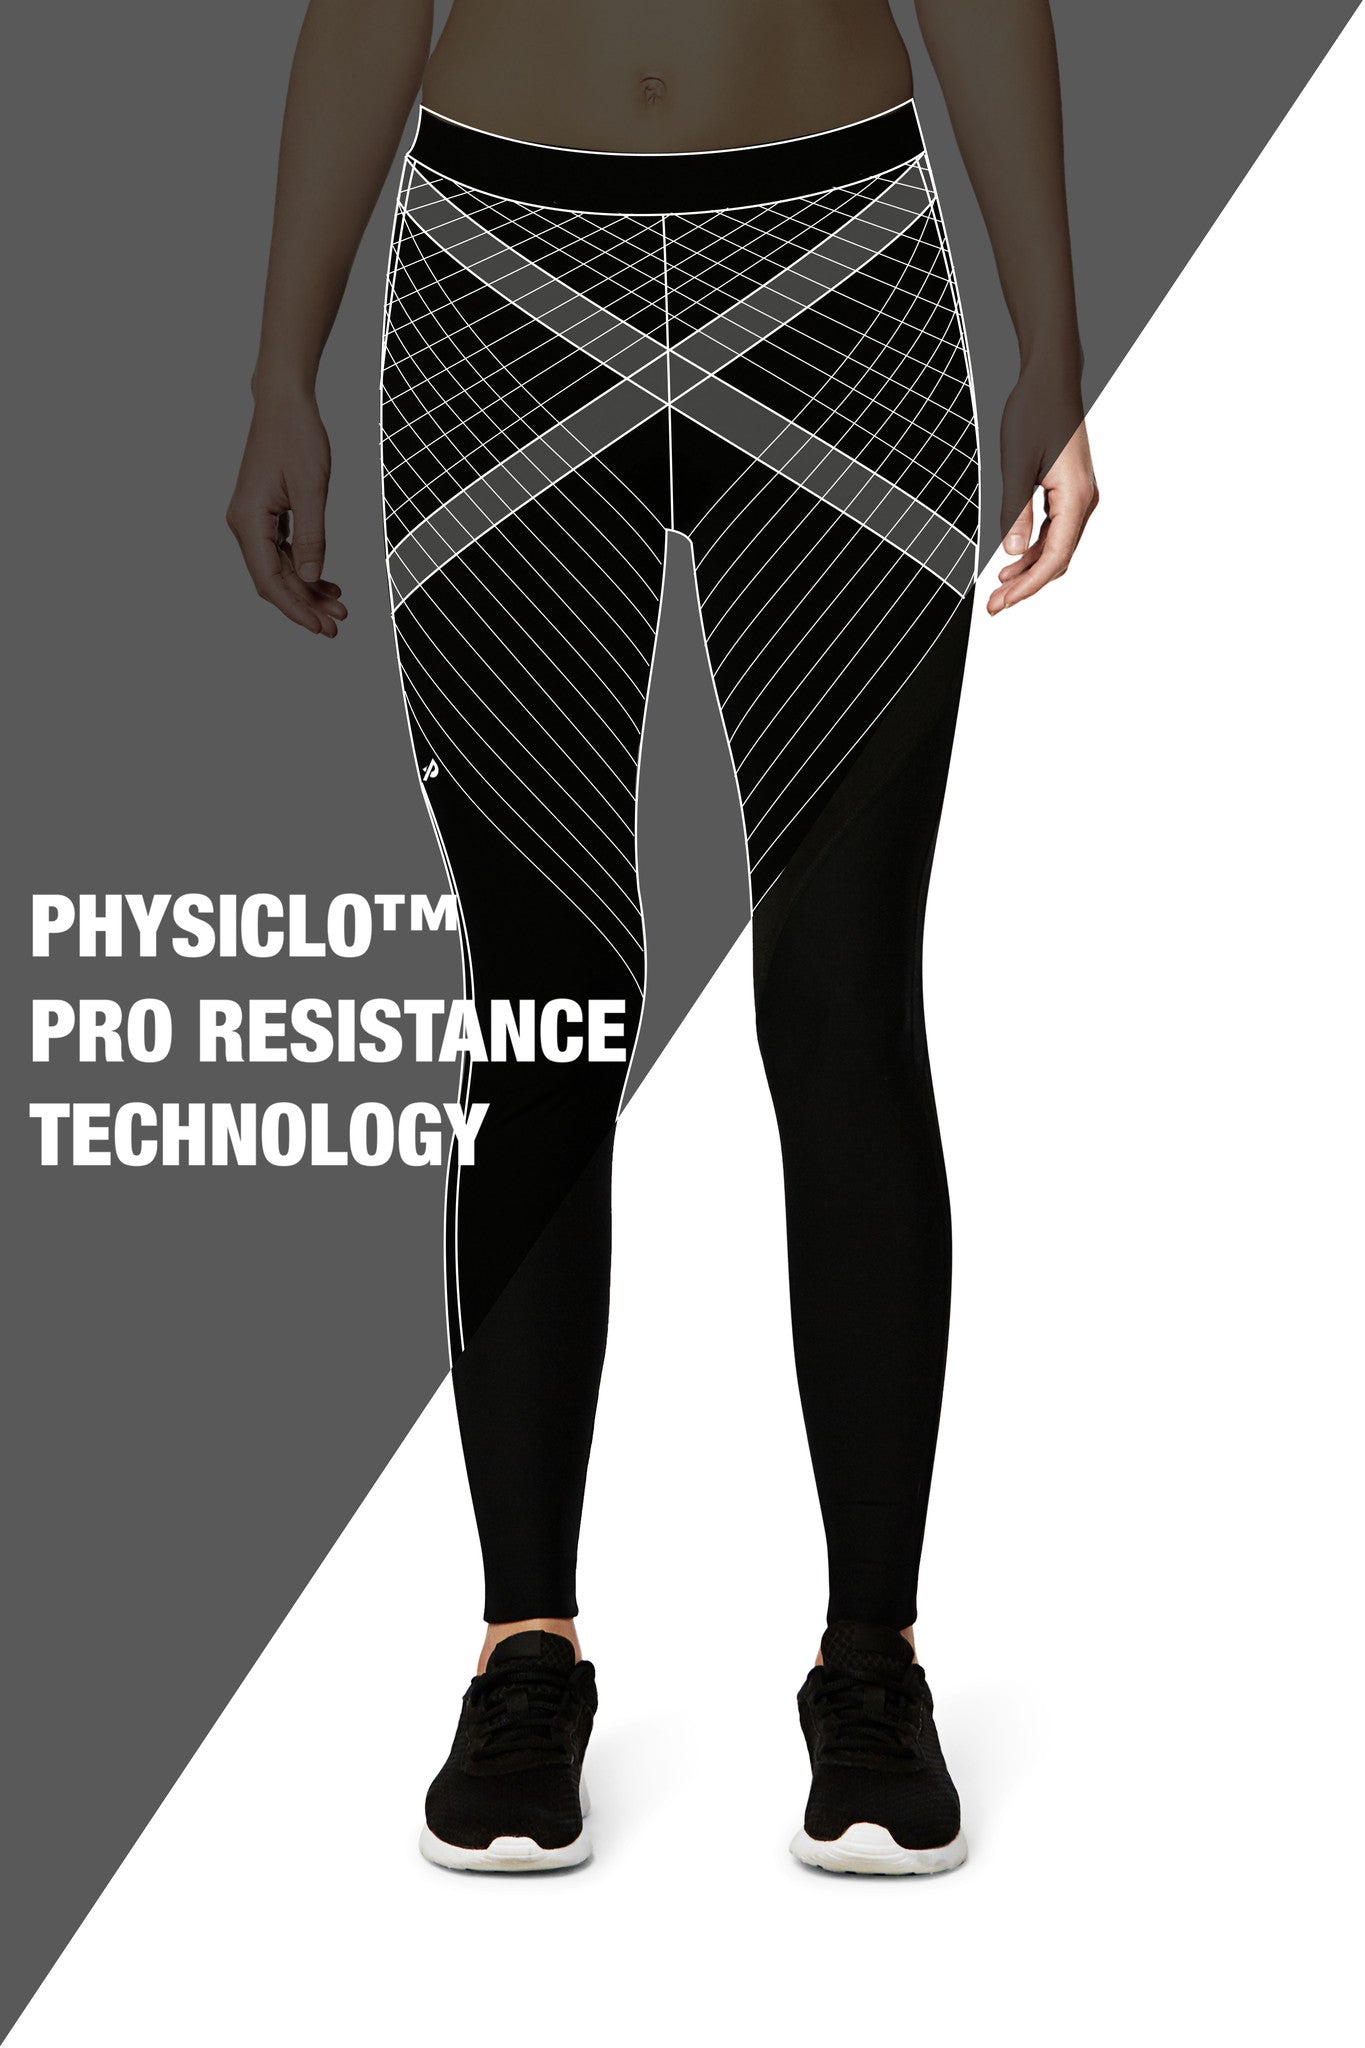 AGOGIE - Resistance Training Pants and Resistance Band Leggings